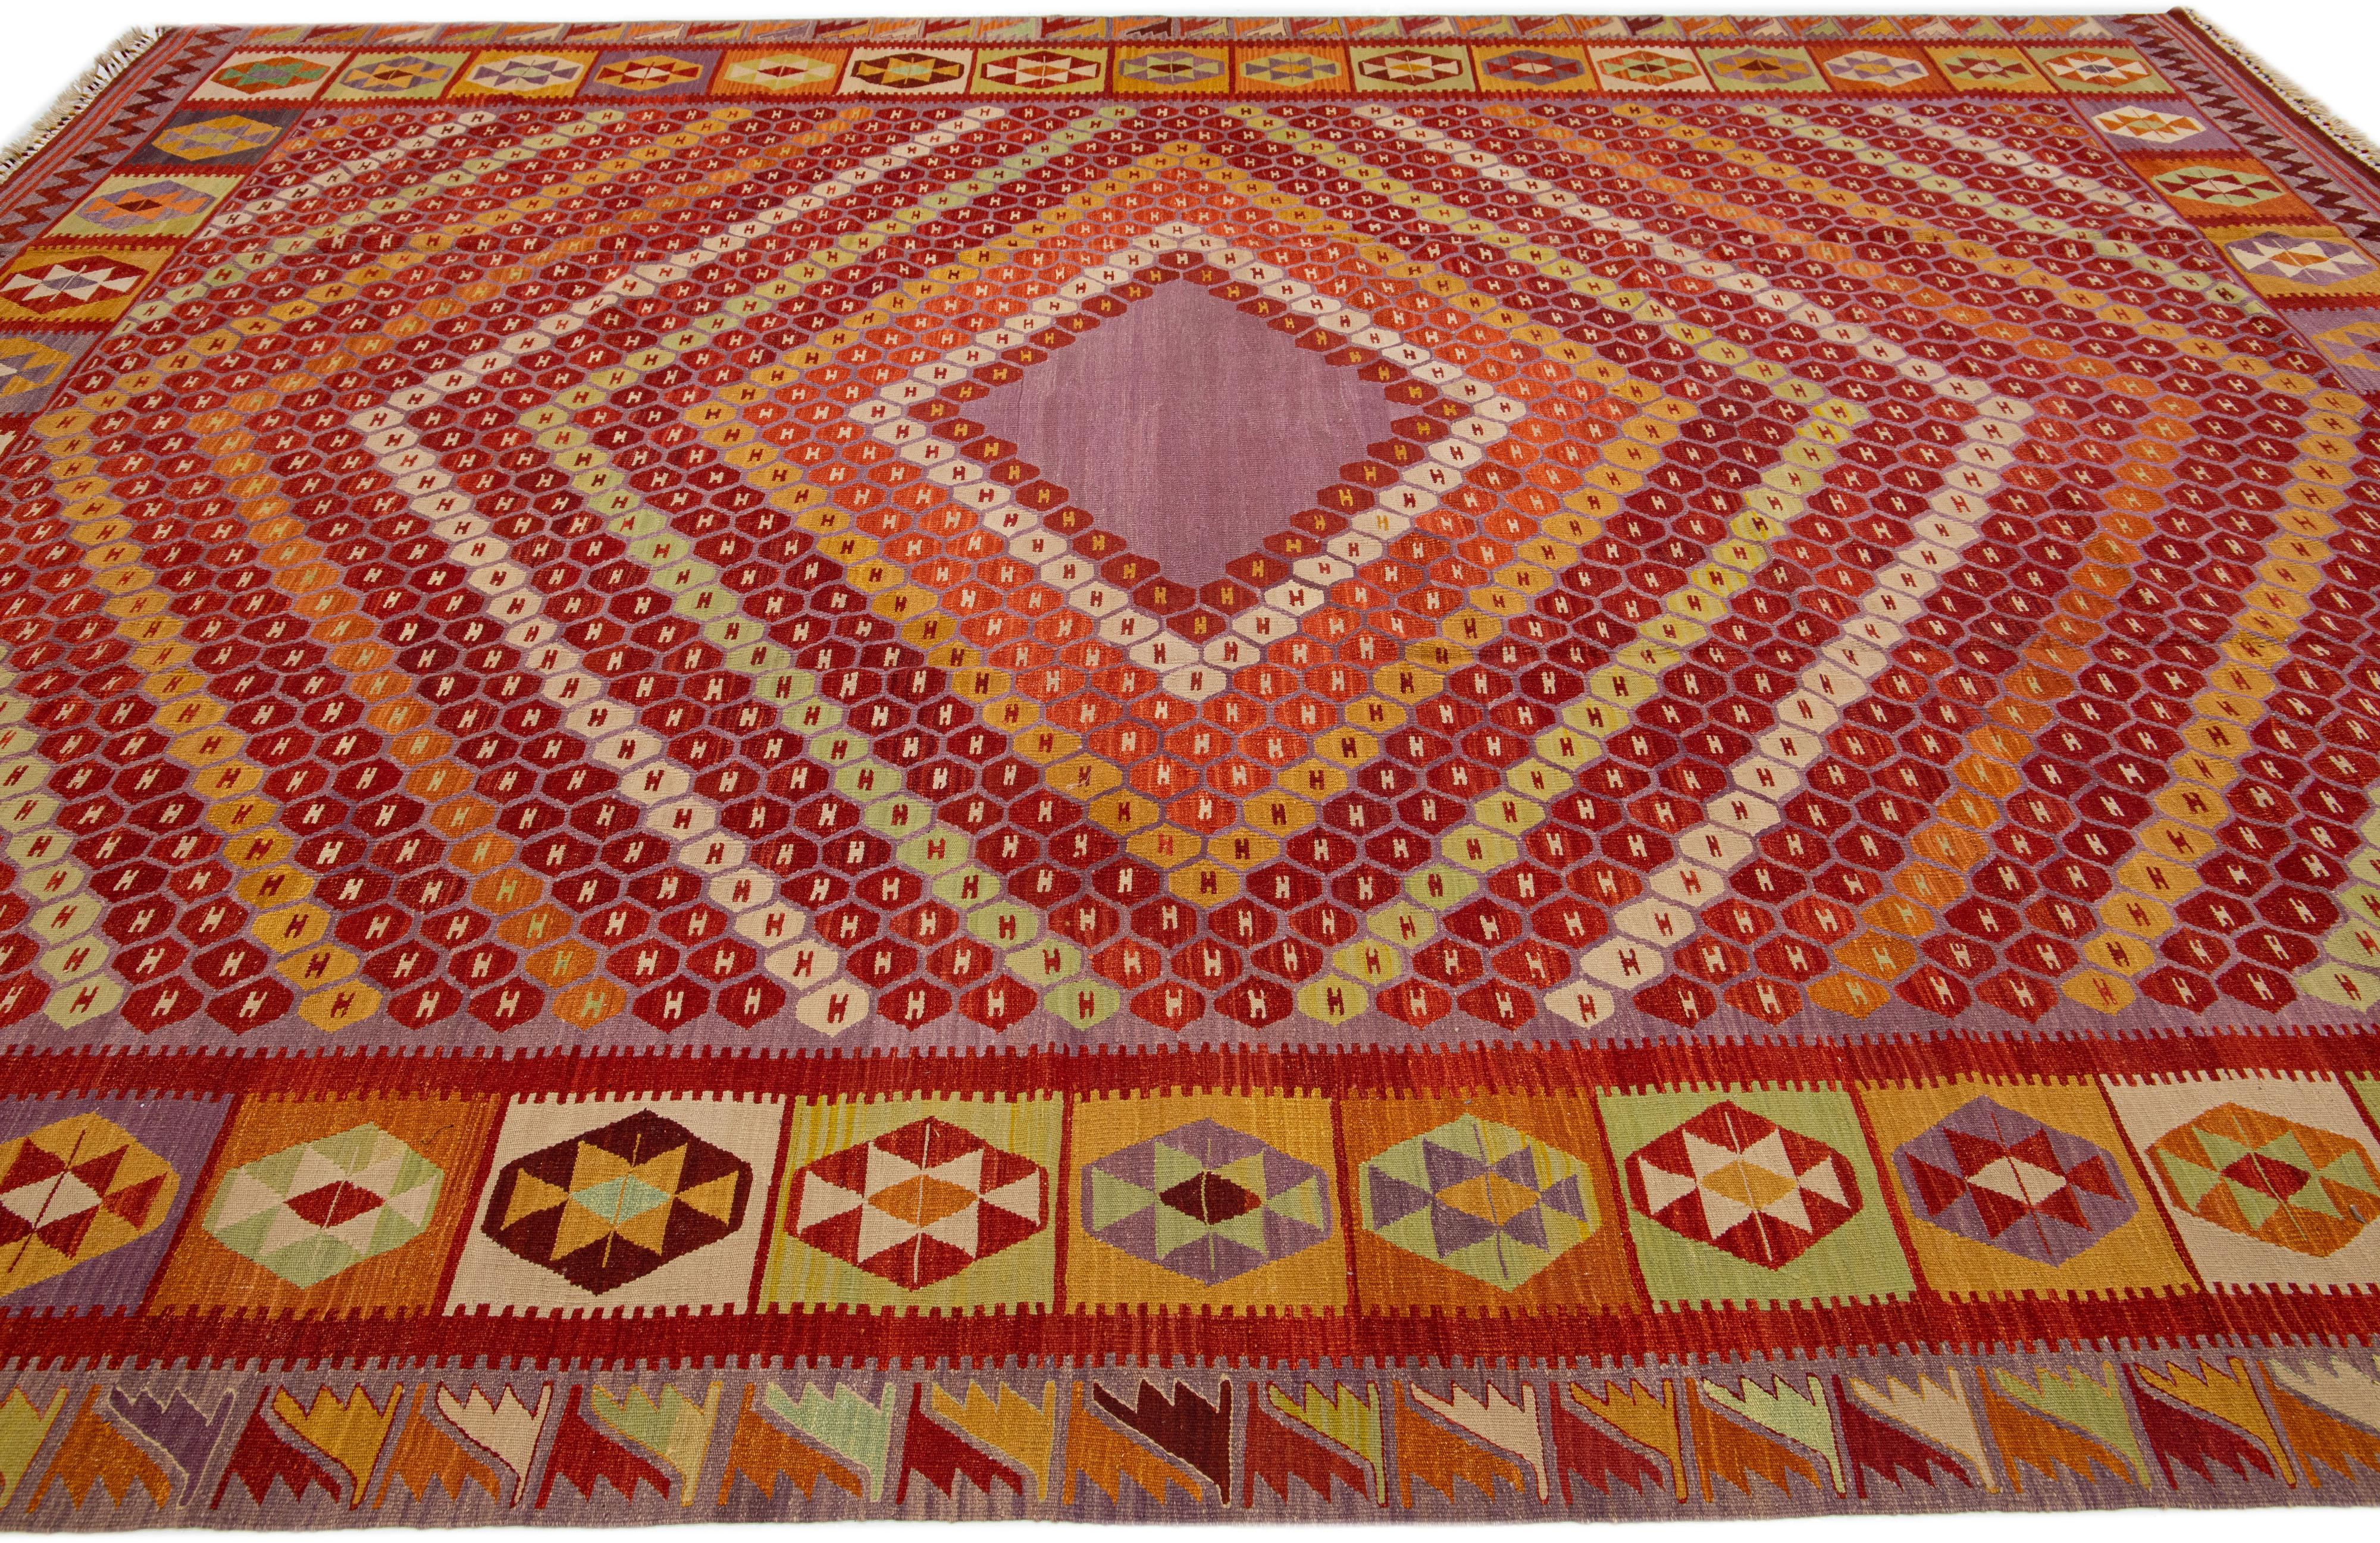 This contemporary kilim flatweave rug of Turkish origin features a colorful and intricate geometric design spread across its entirety.

This rug measures 10'7